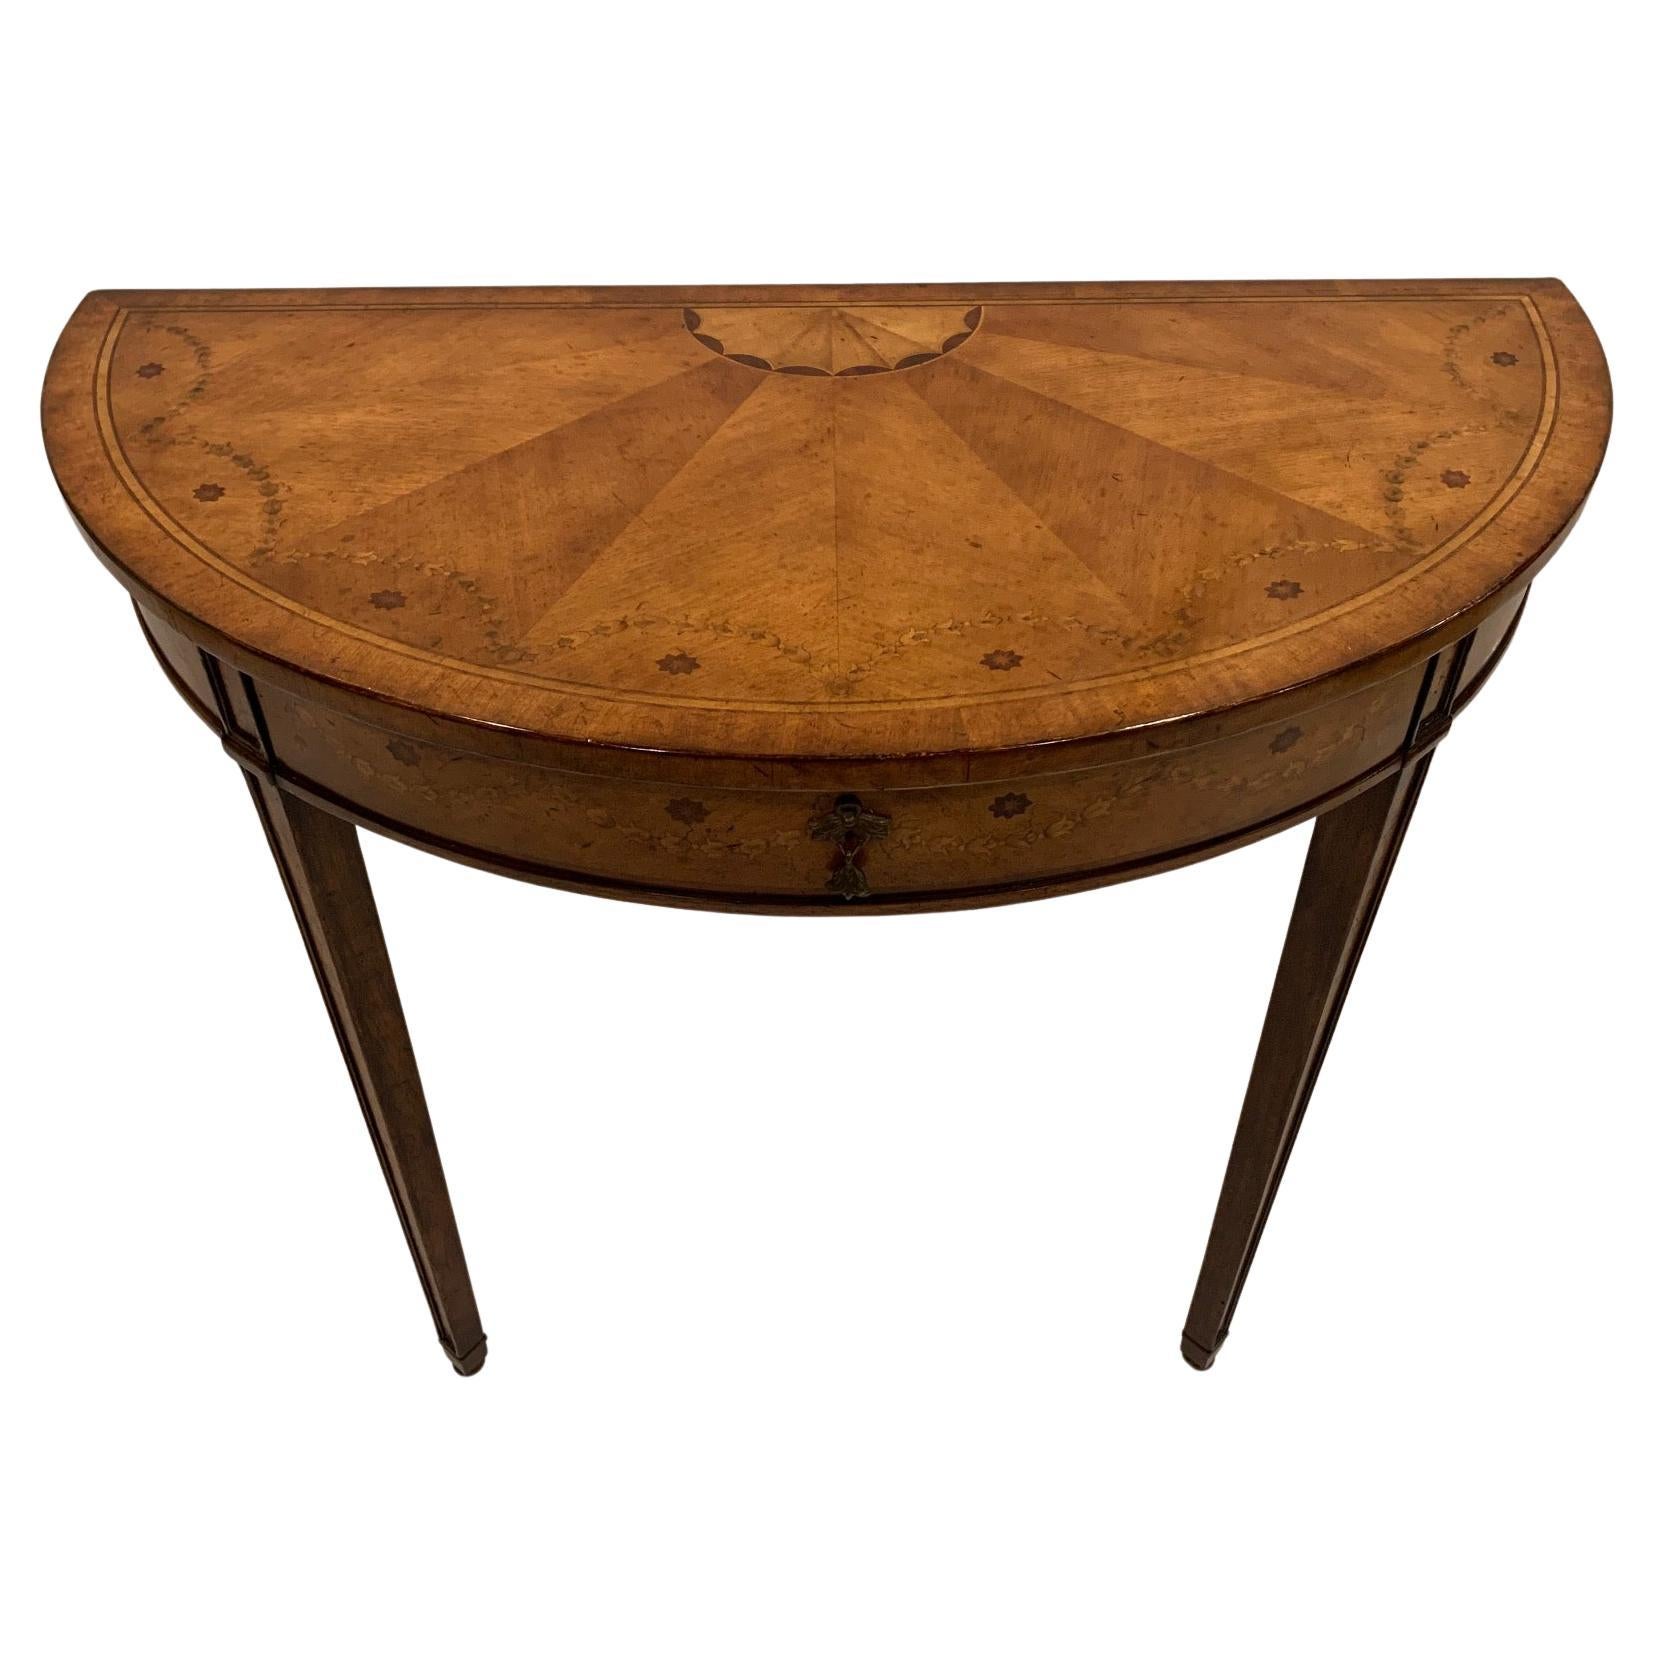 Lovely Inlaid Demilune Console Table by Jonathan Charles